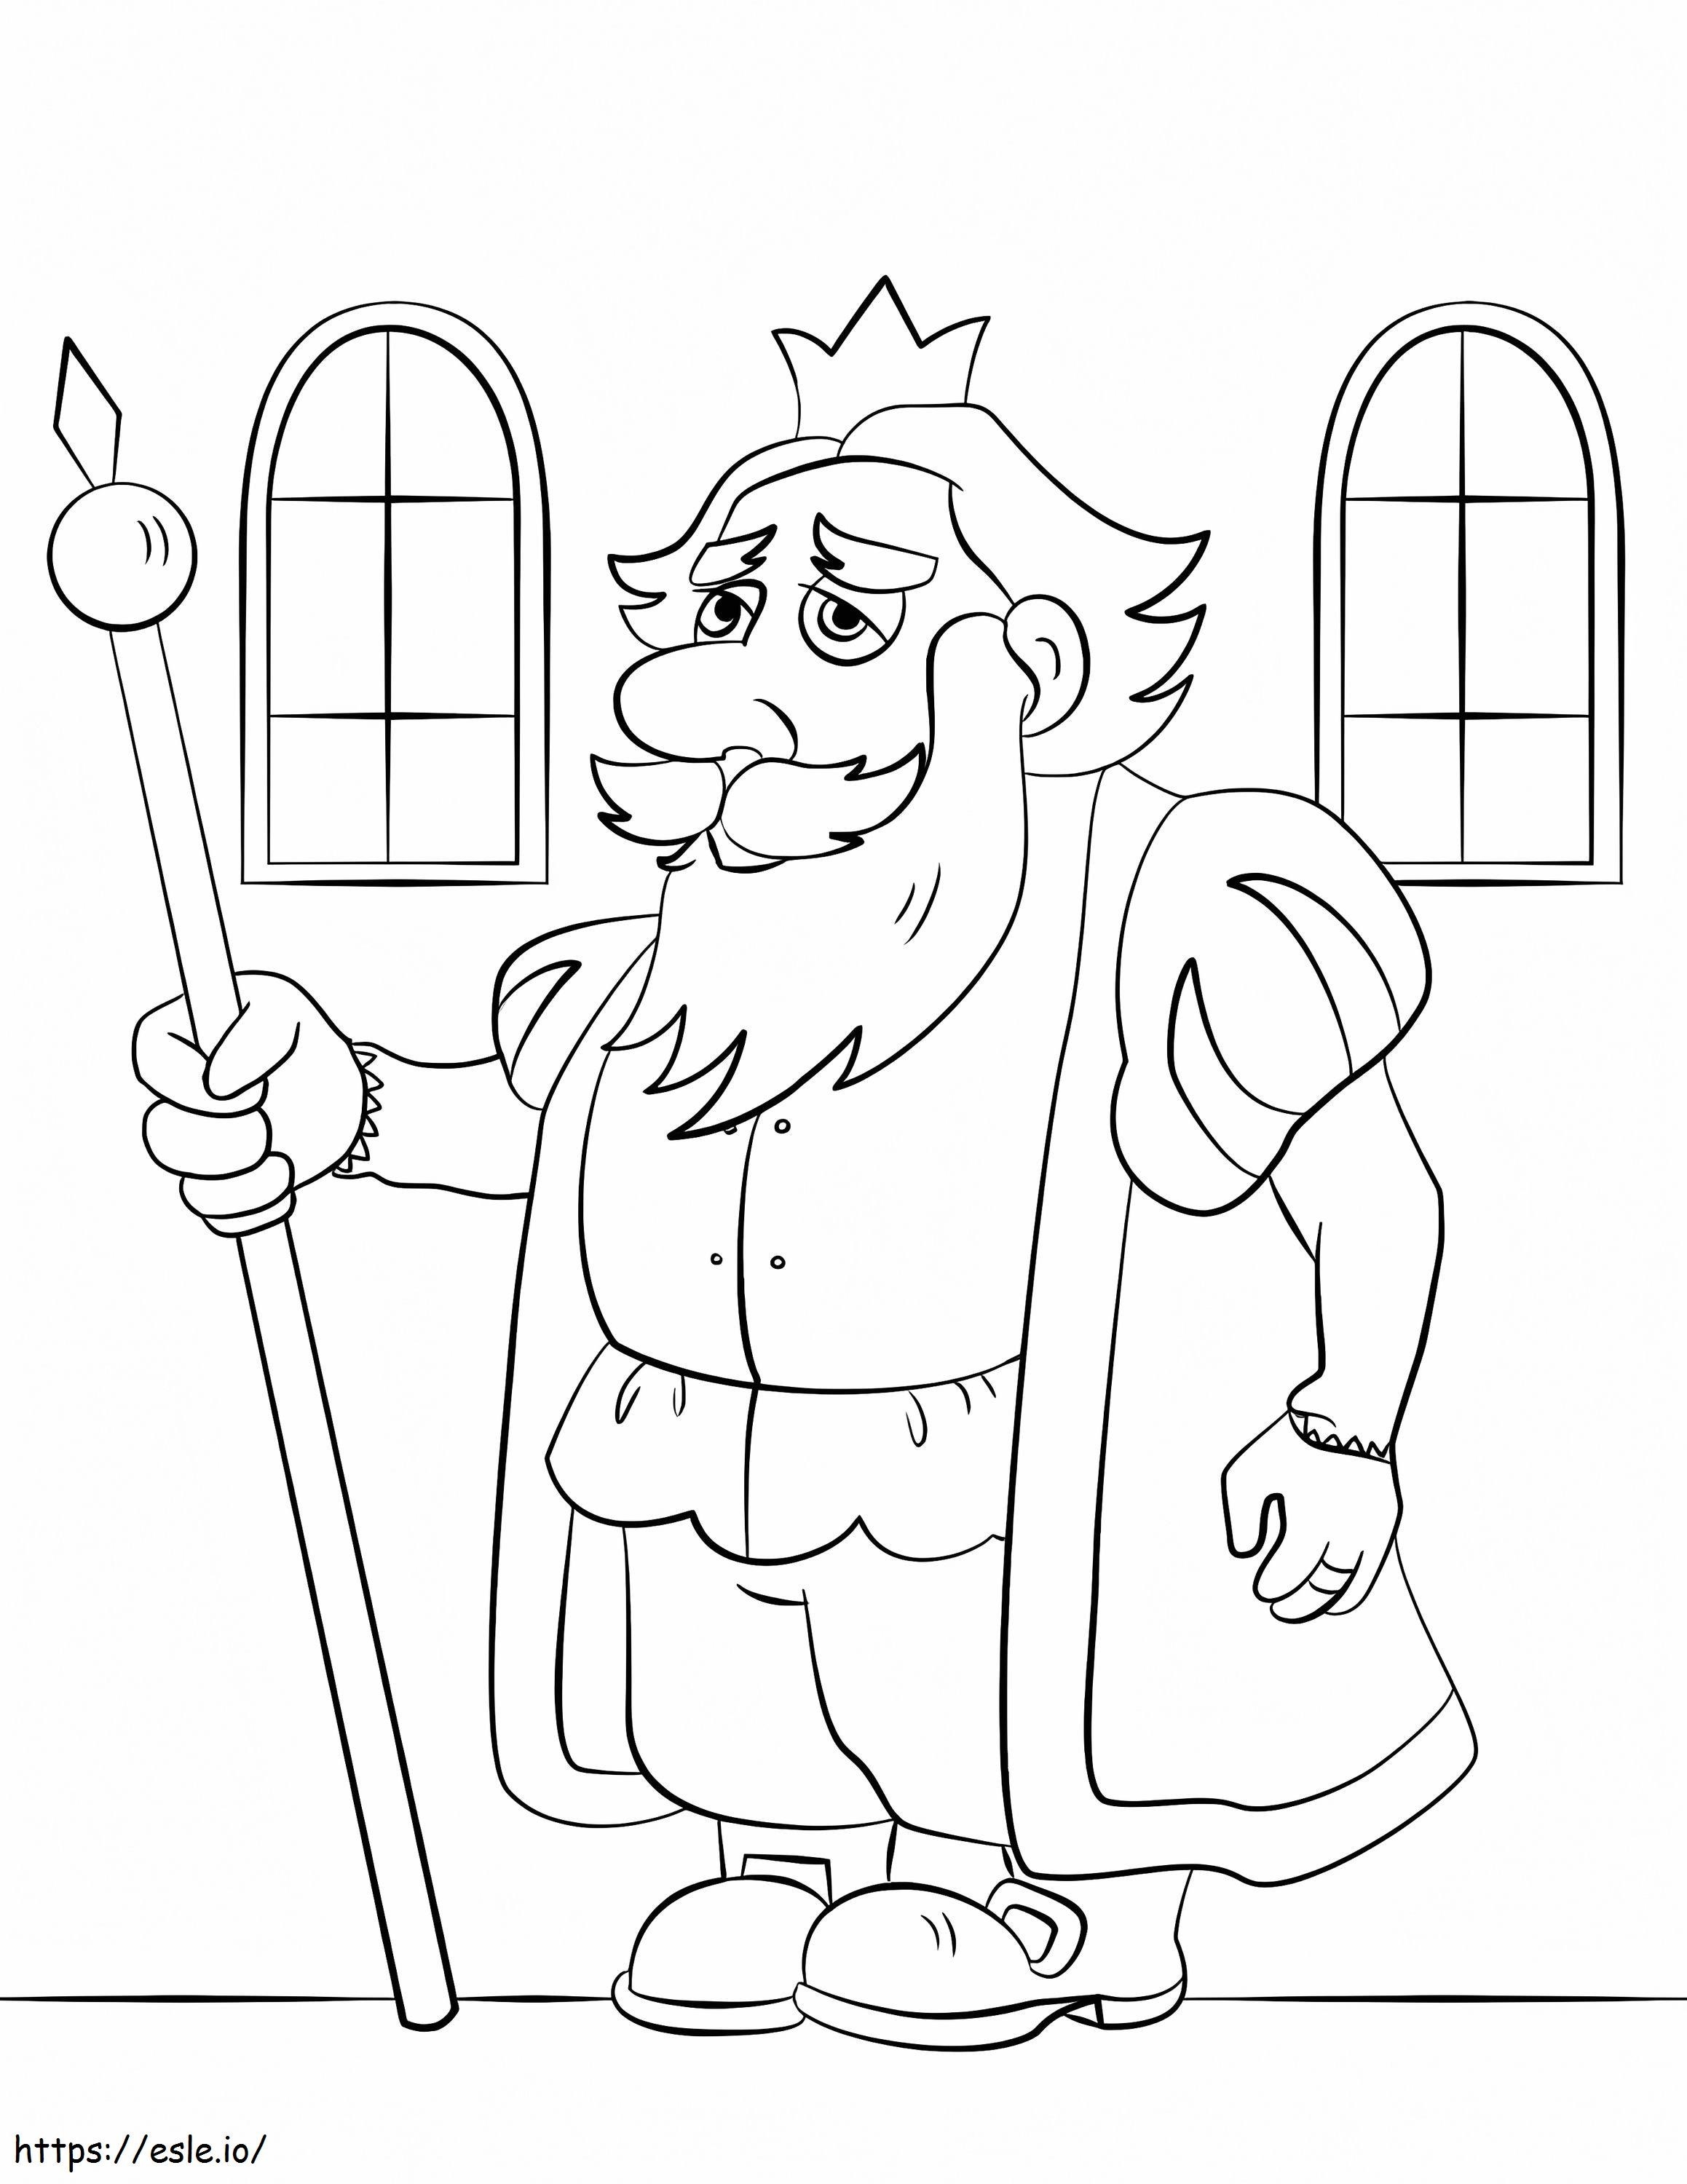 Old King Cartoon Coloring Page